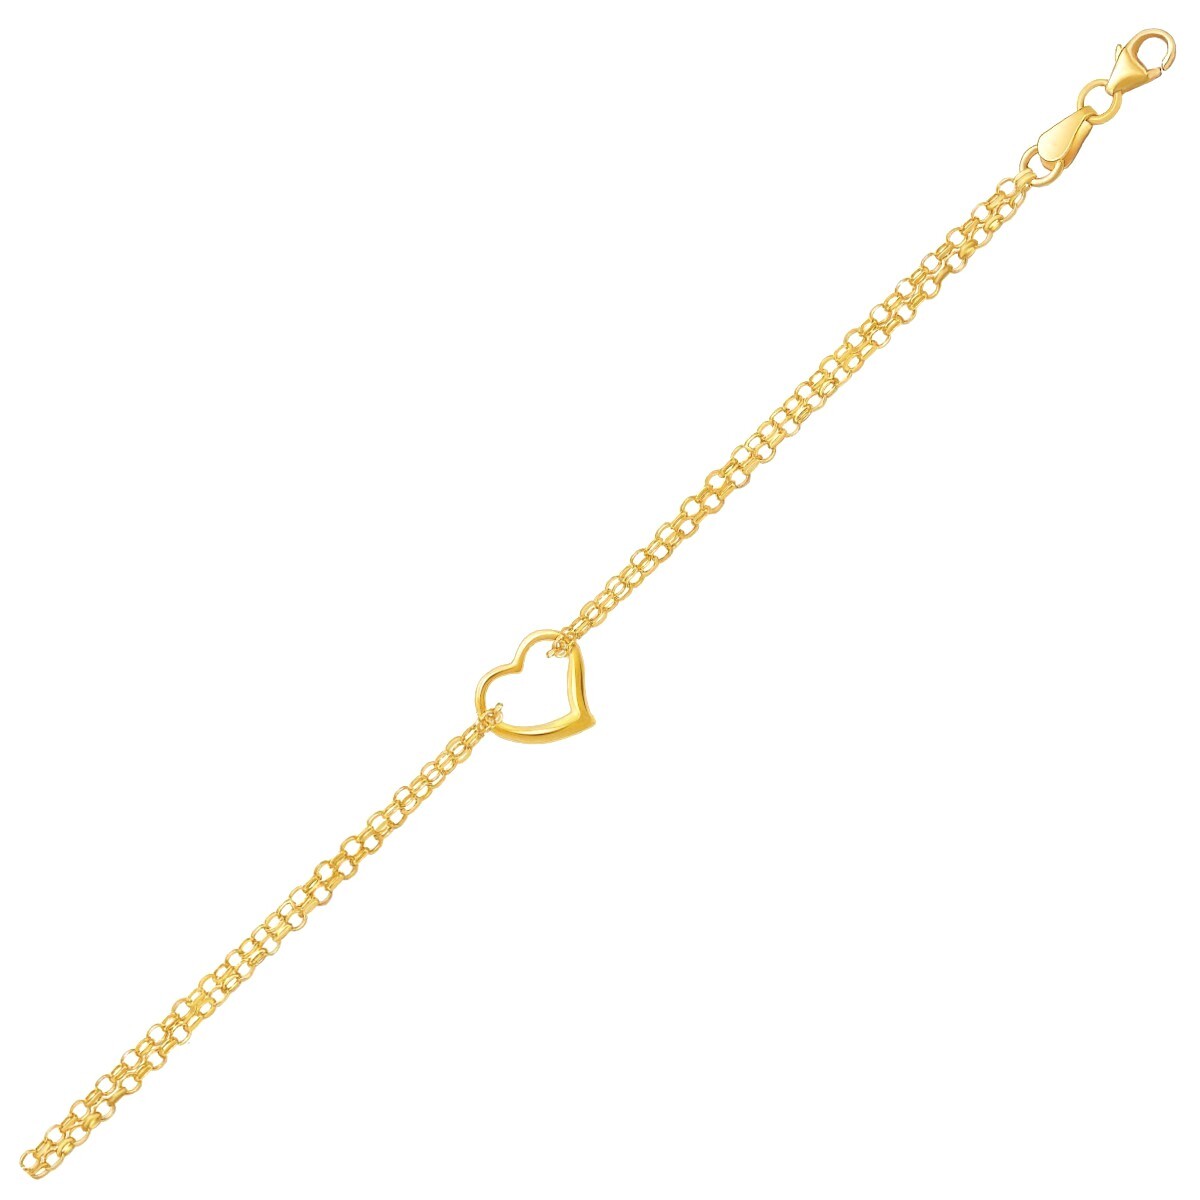 10k Yellow Gold Double Rolo Chain Anklet with an Open Heart Station, size 10''